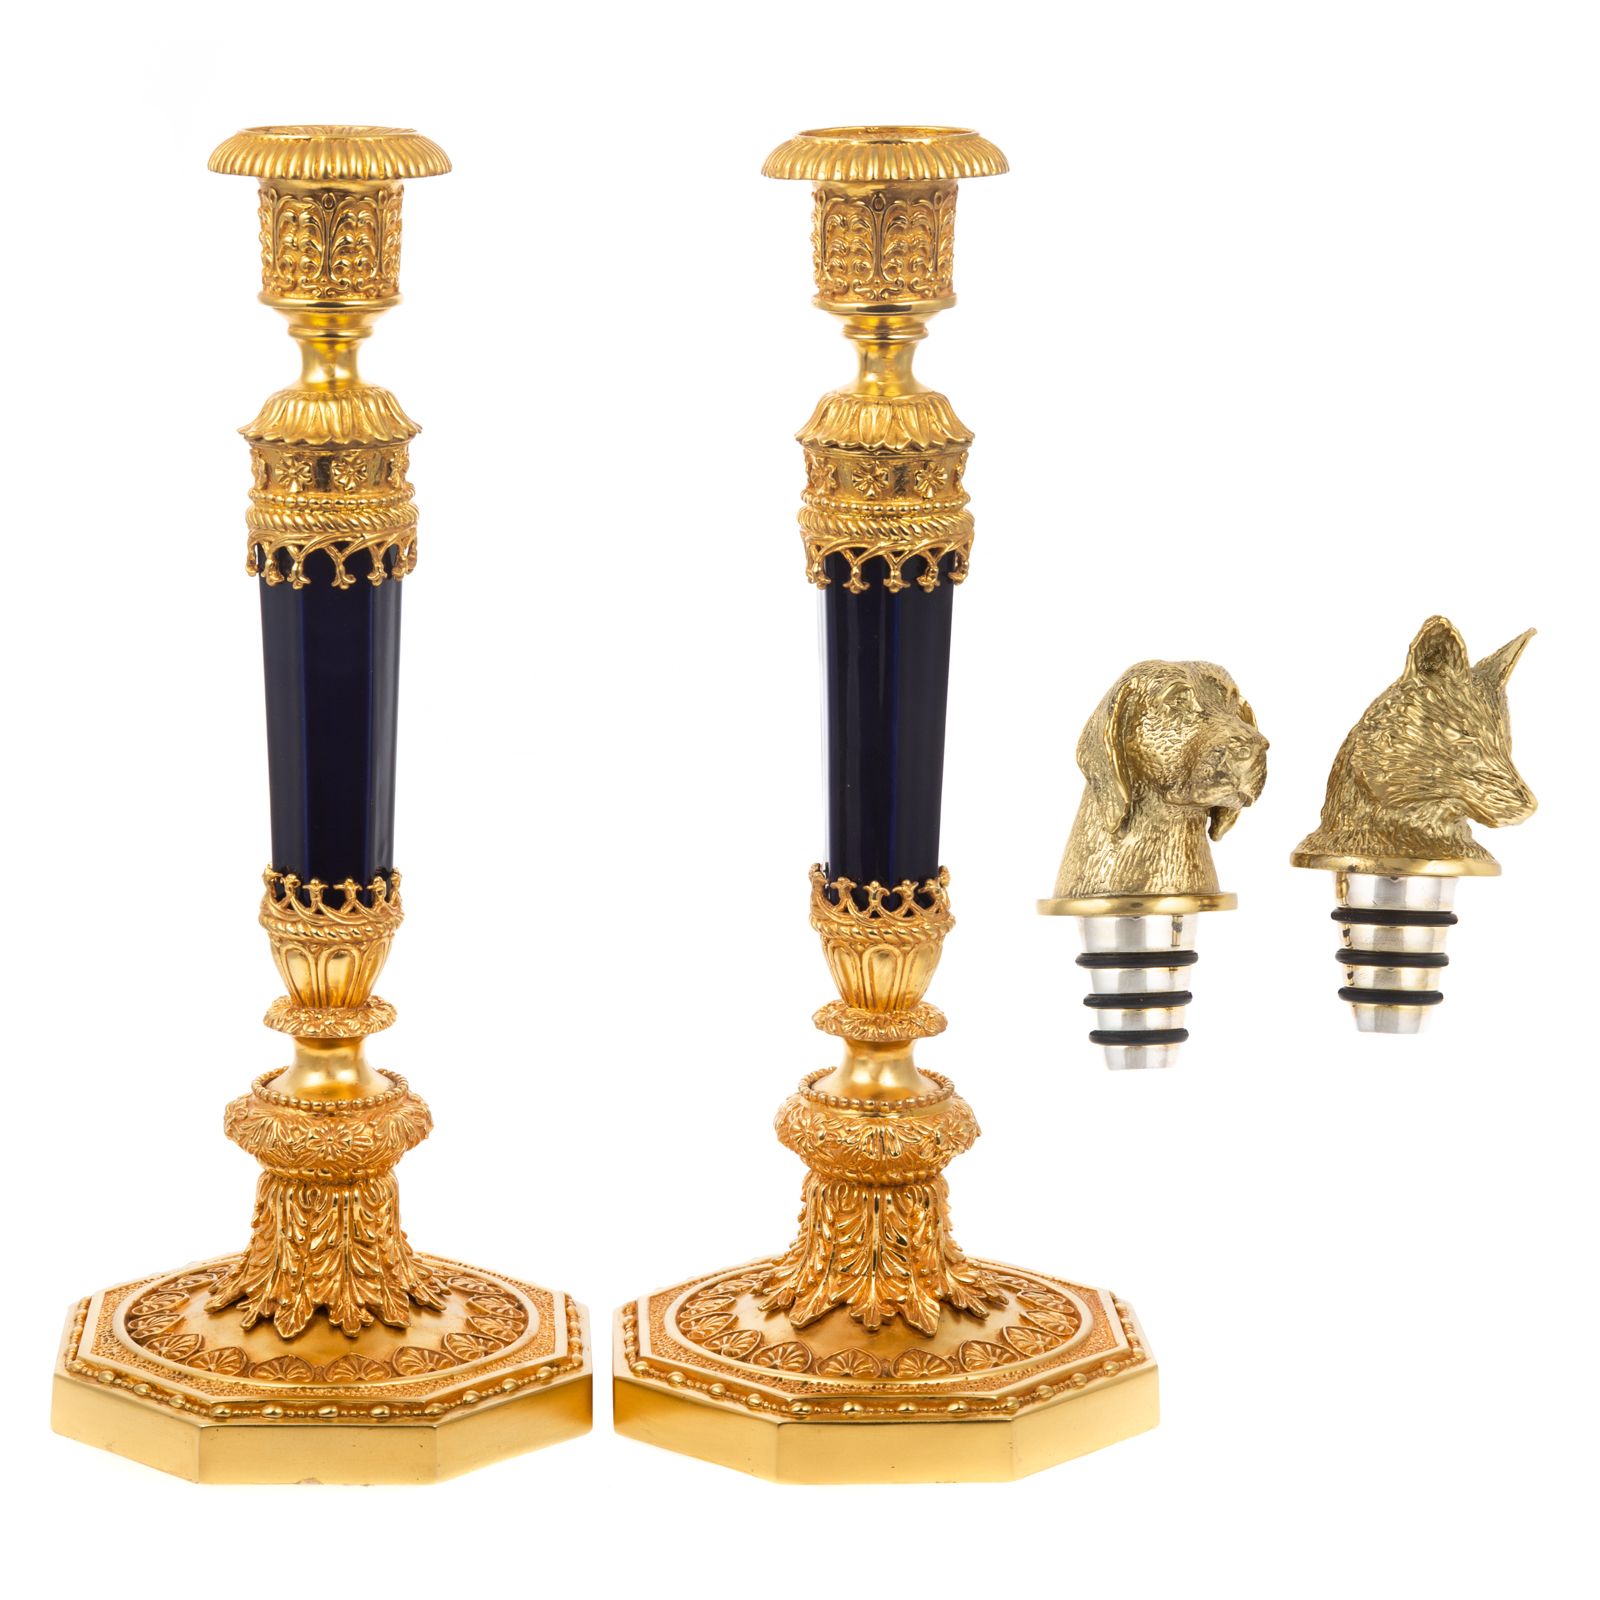 A PAIR OF LOUIS XVI STYLE CANDLESTICKS